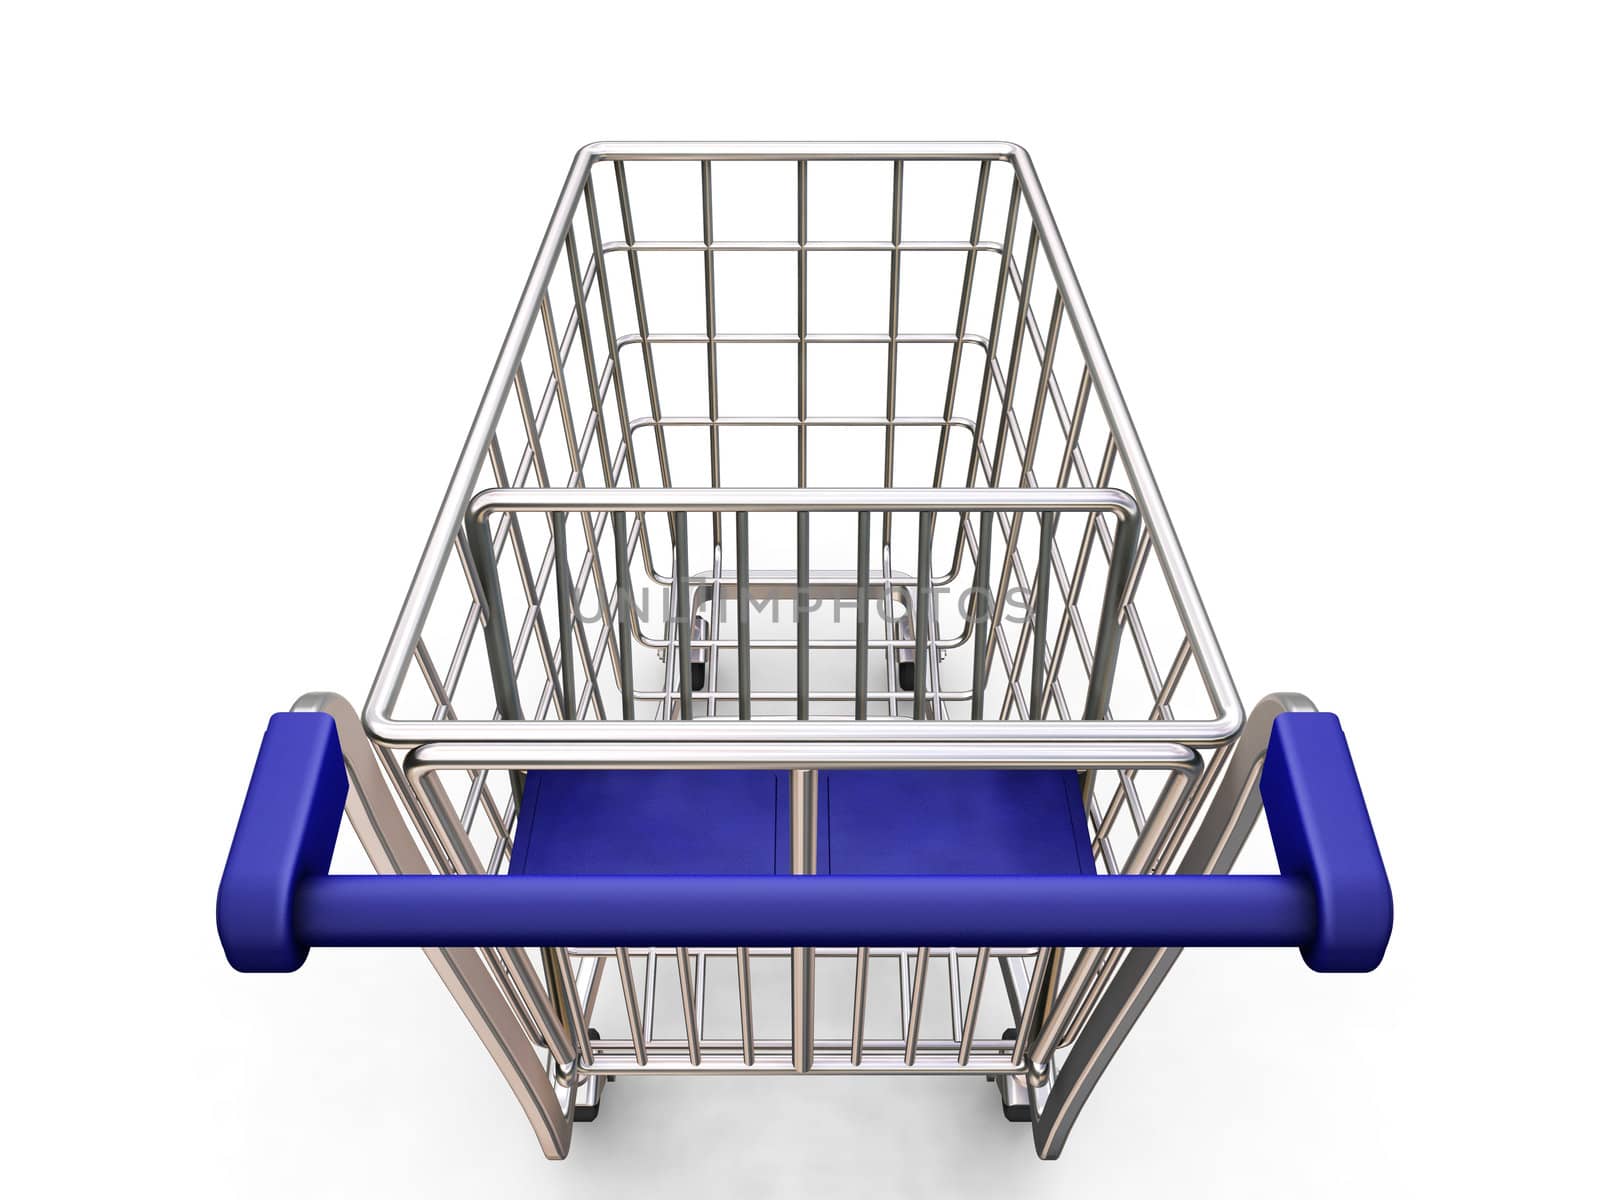 3D render of a shopping trolley